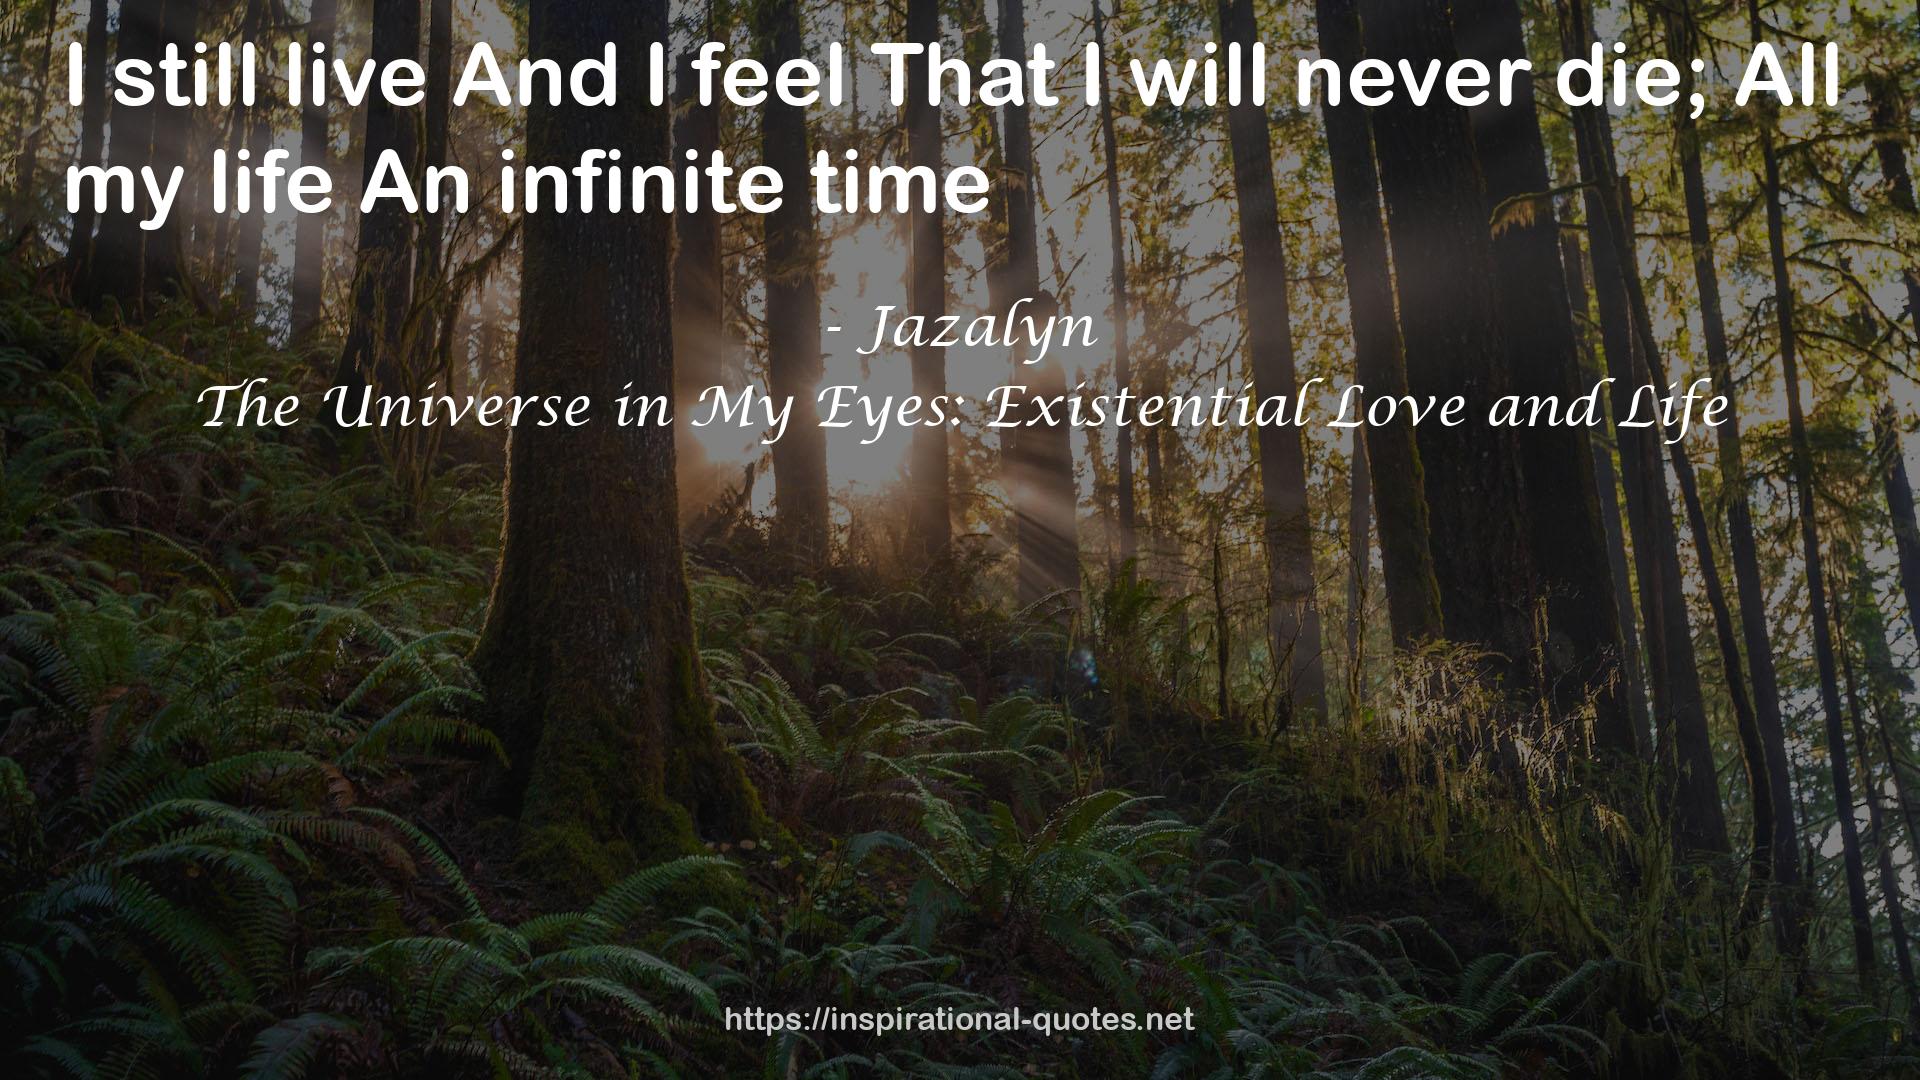 The Universe in My Eyes: Existential Love and Life QUOTES